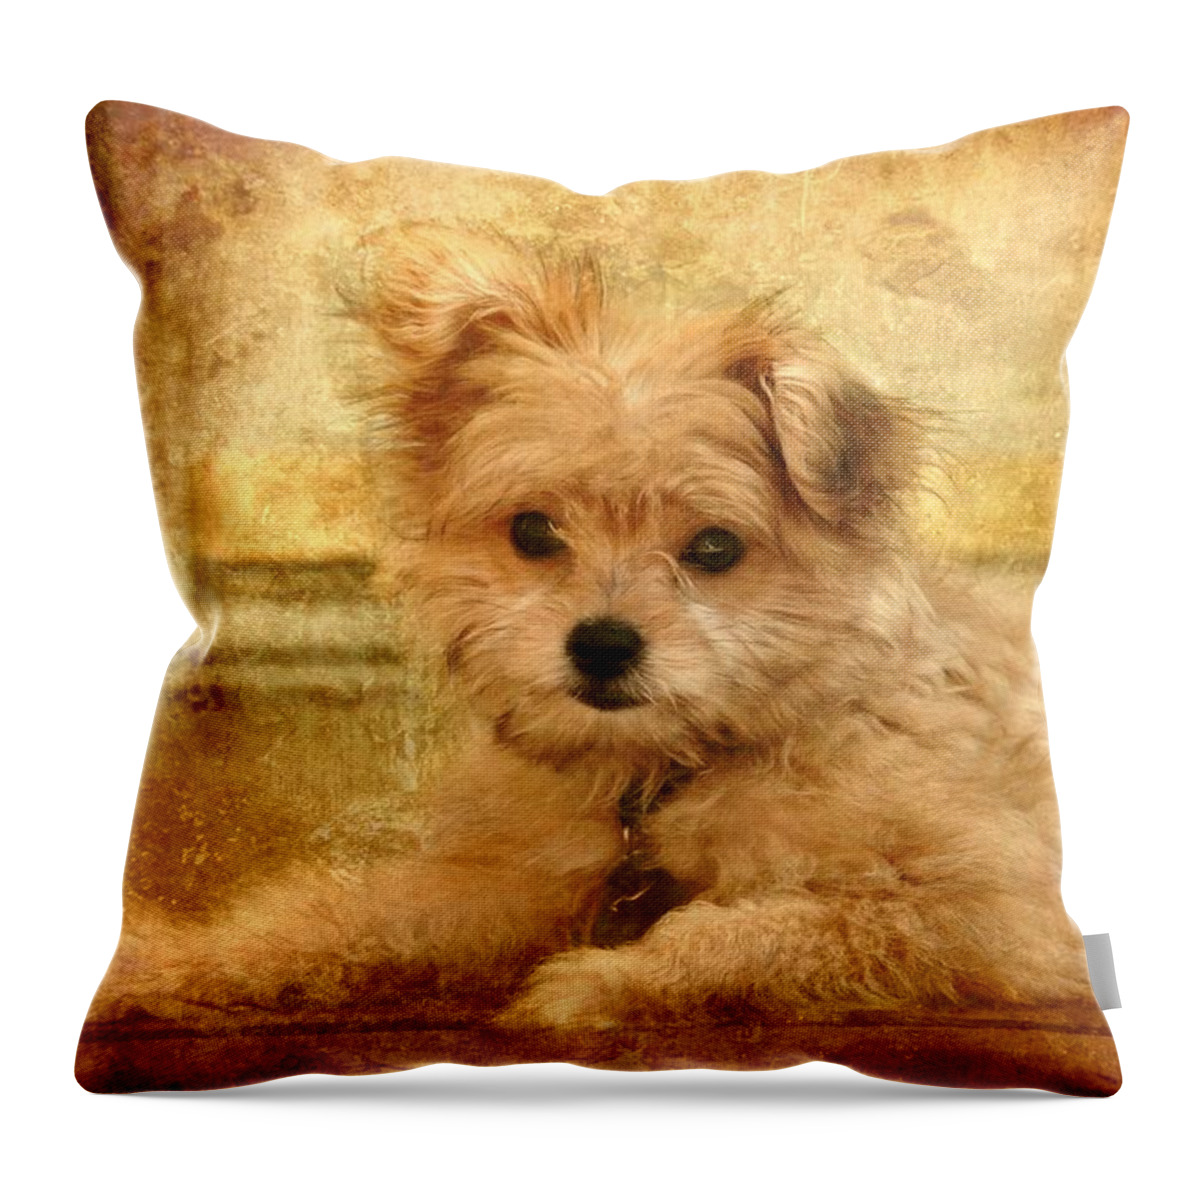 Puppies Throw Pillow featuring the photograph Taking A Break by Angie Tirado